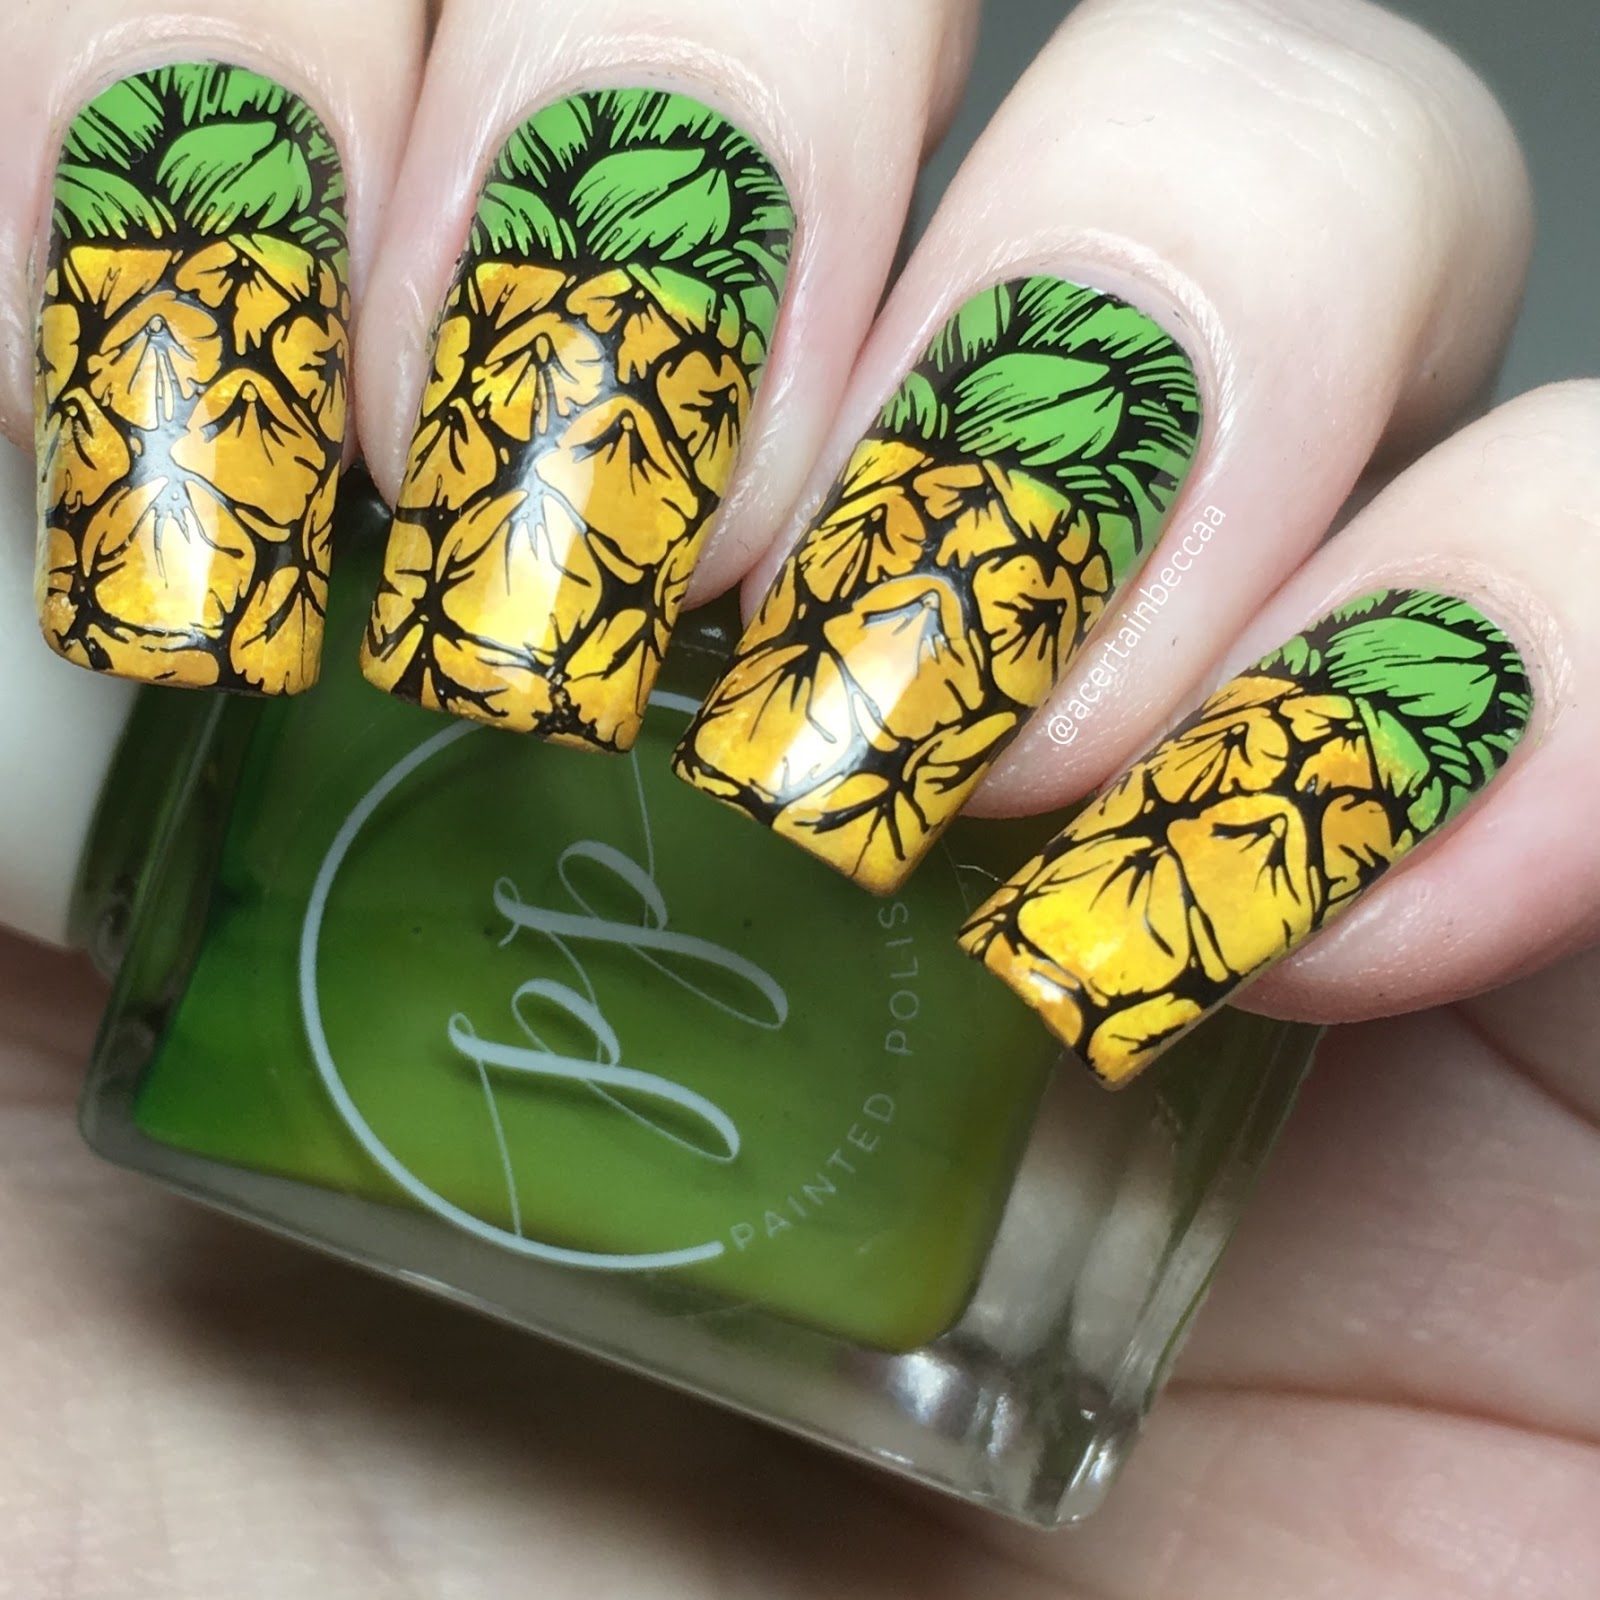 Pineapple Nail Art · How To Paint A Fruity Nail · Beauty on Cut Out + Keep